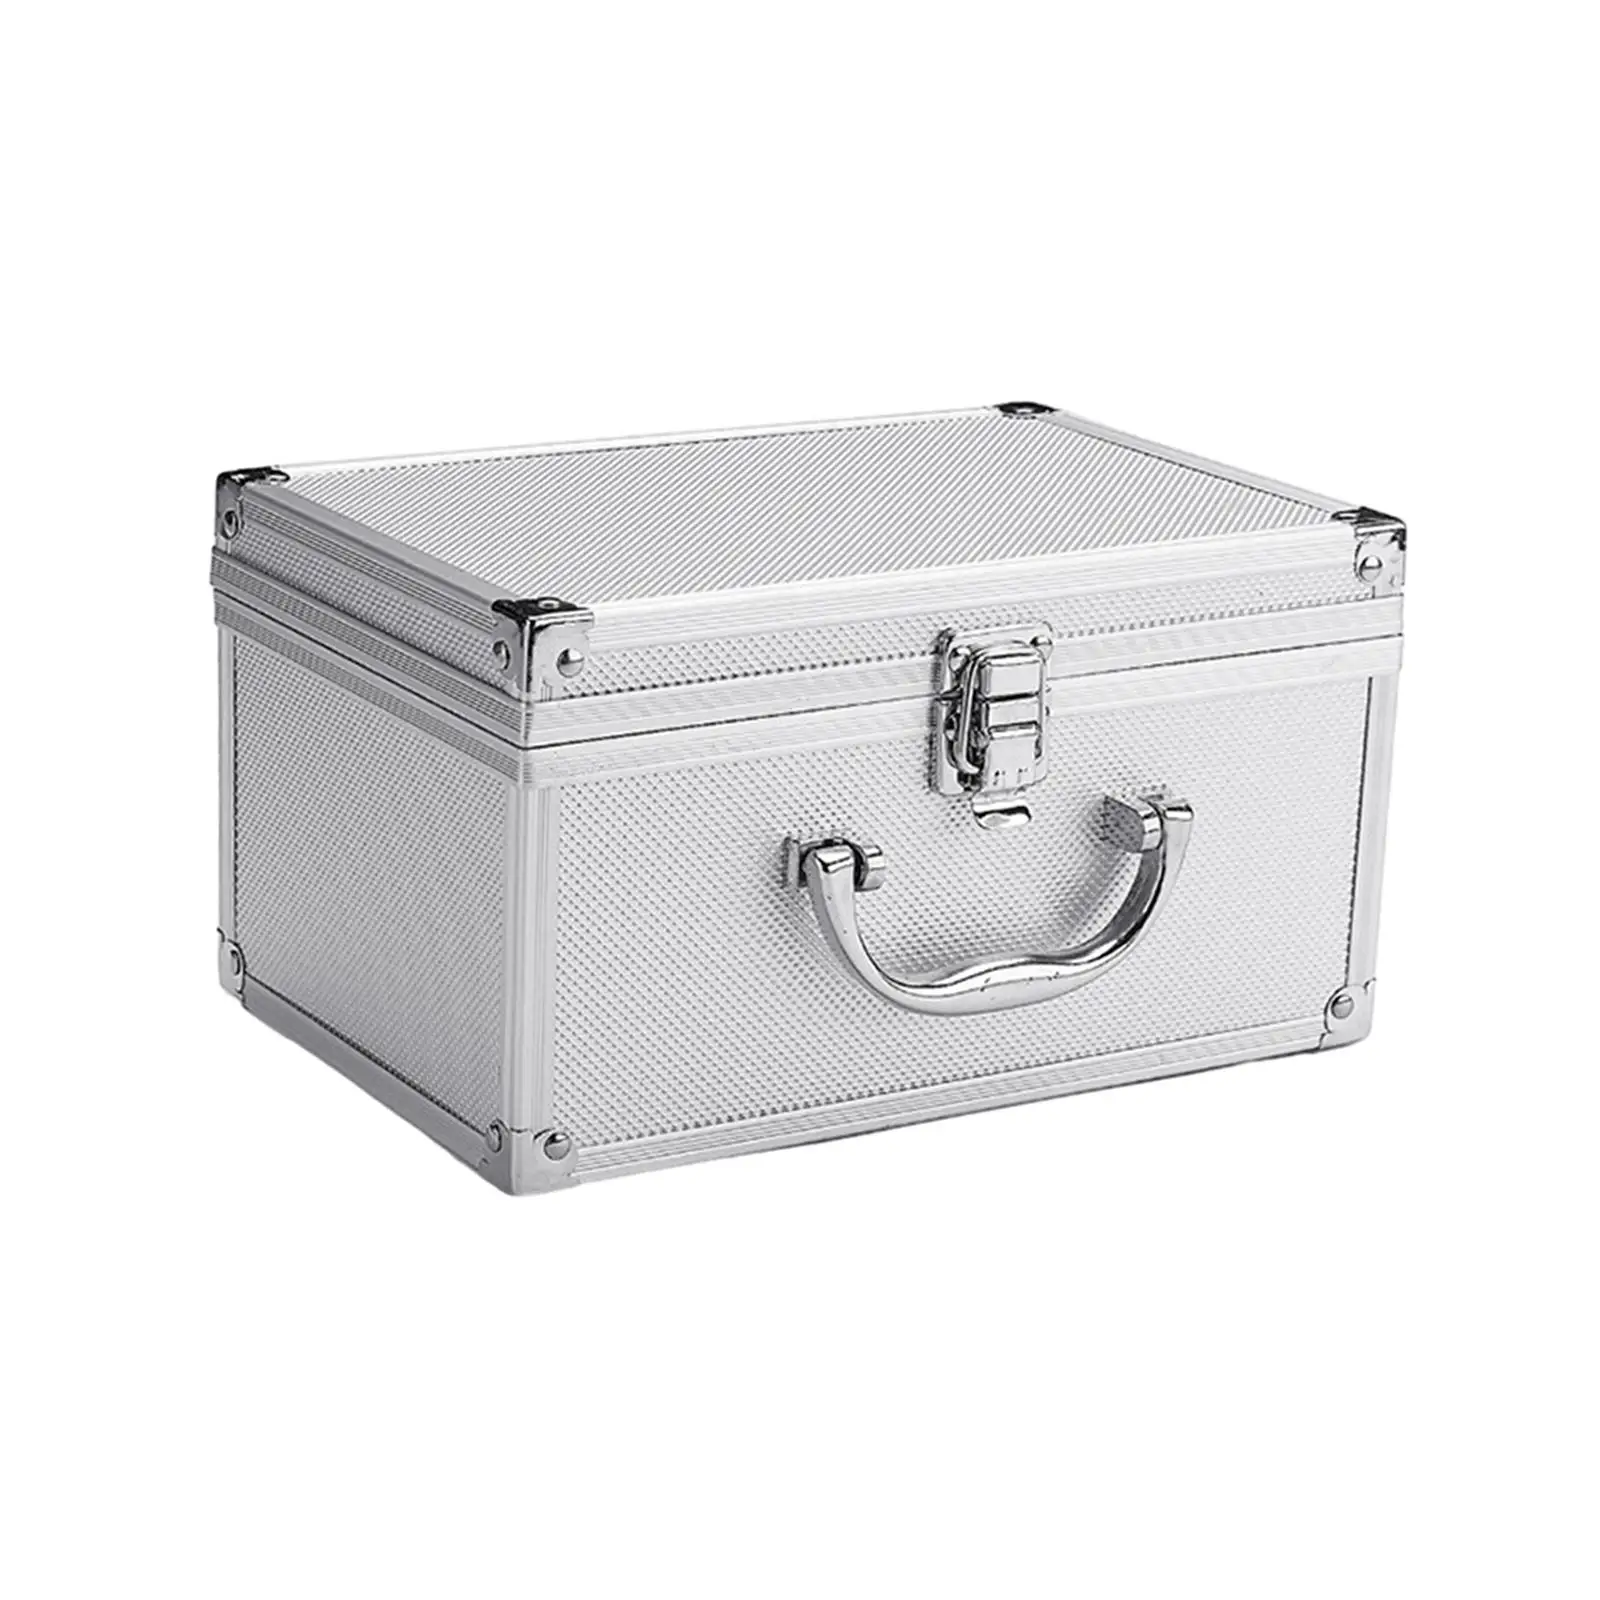 Toolbox Storage Box Electrician Repairs Box Suitcase Durable Drill Set Toolbox Multifunction Carrying Case for Household Car